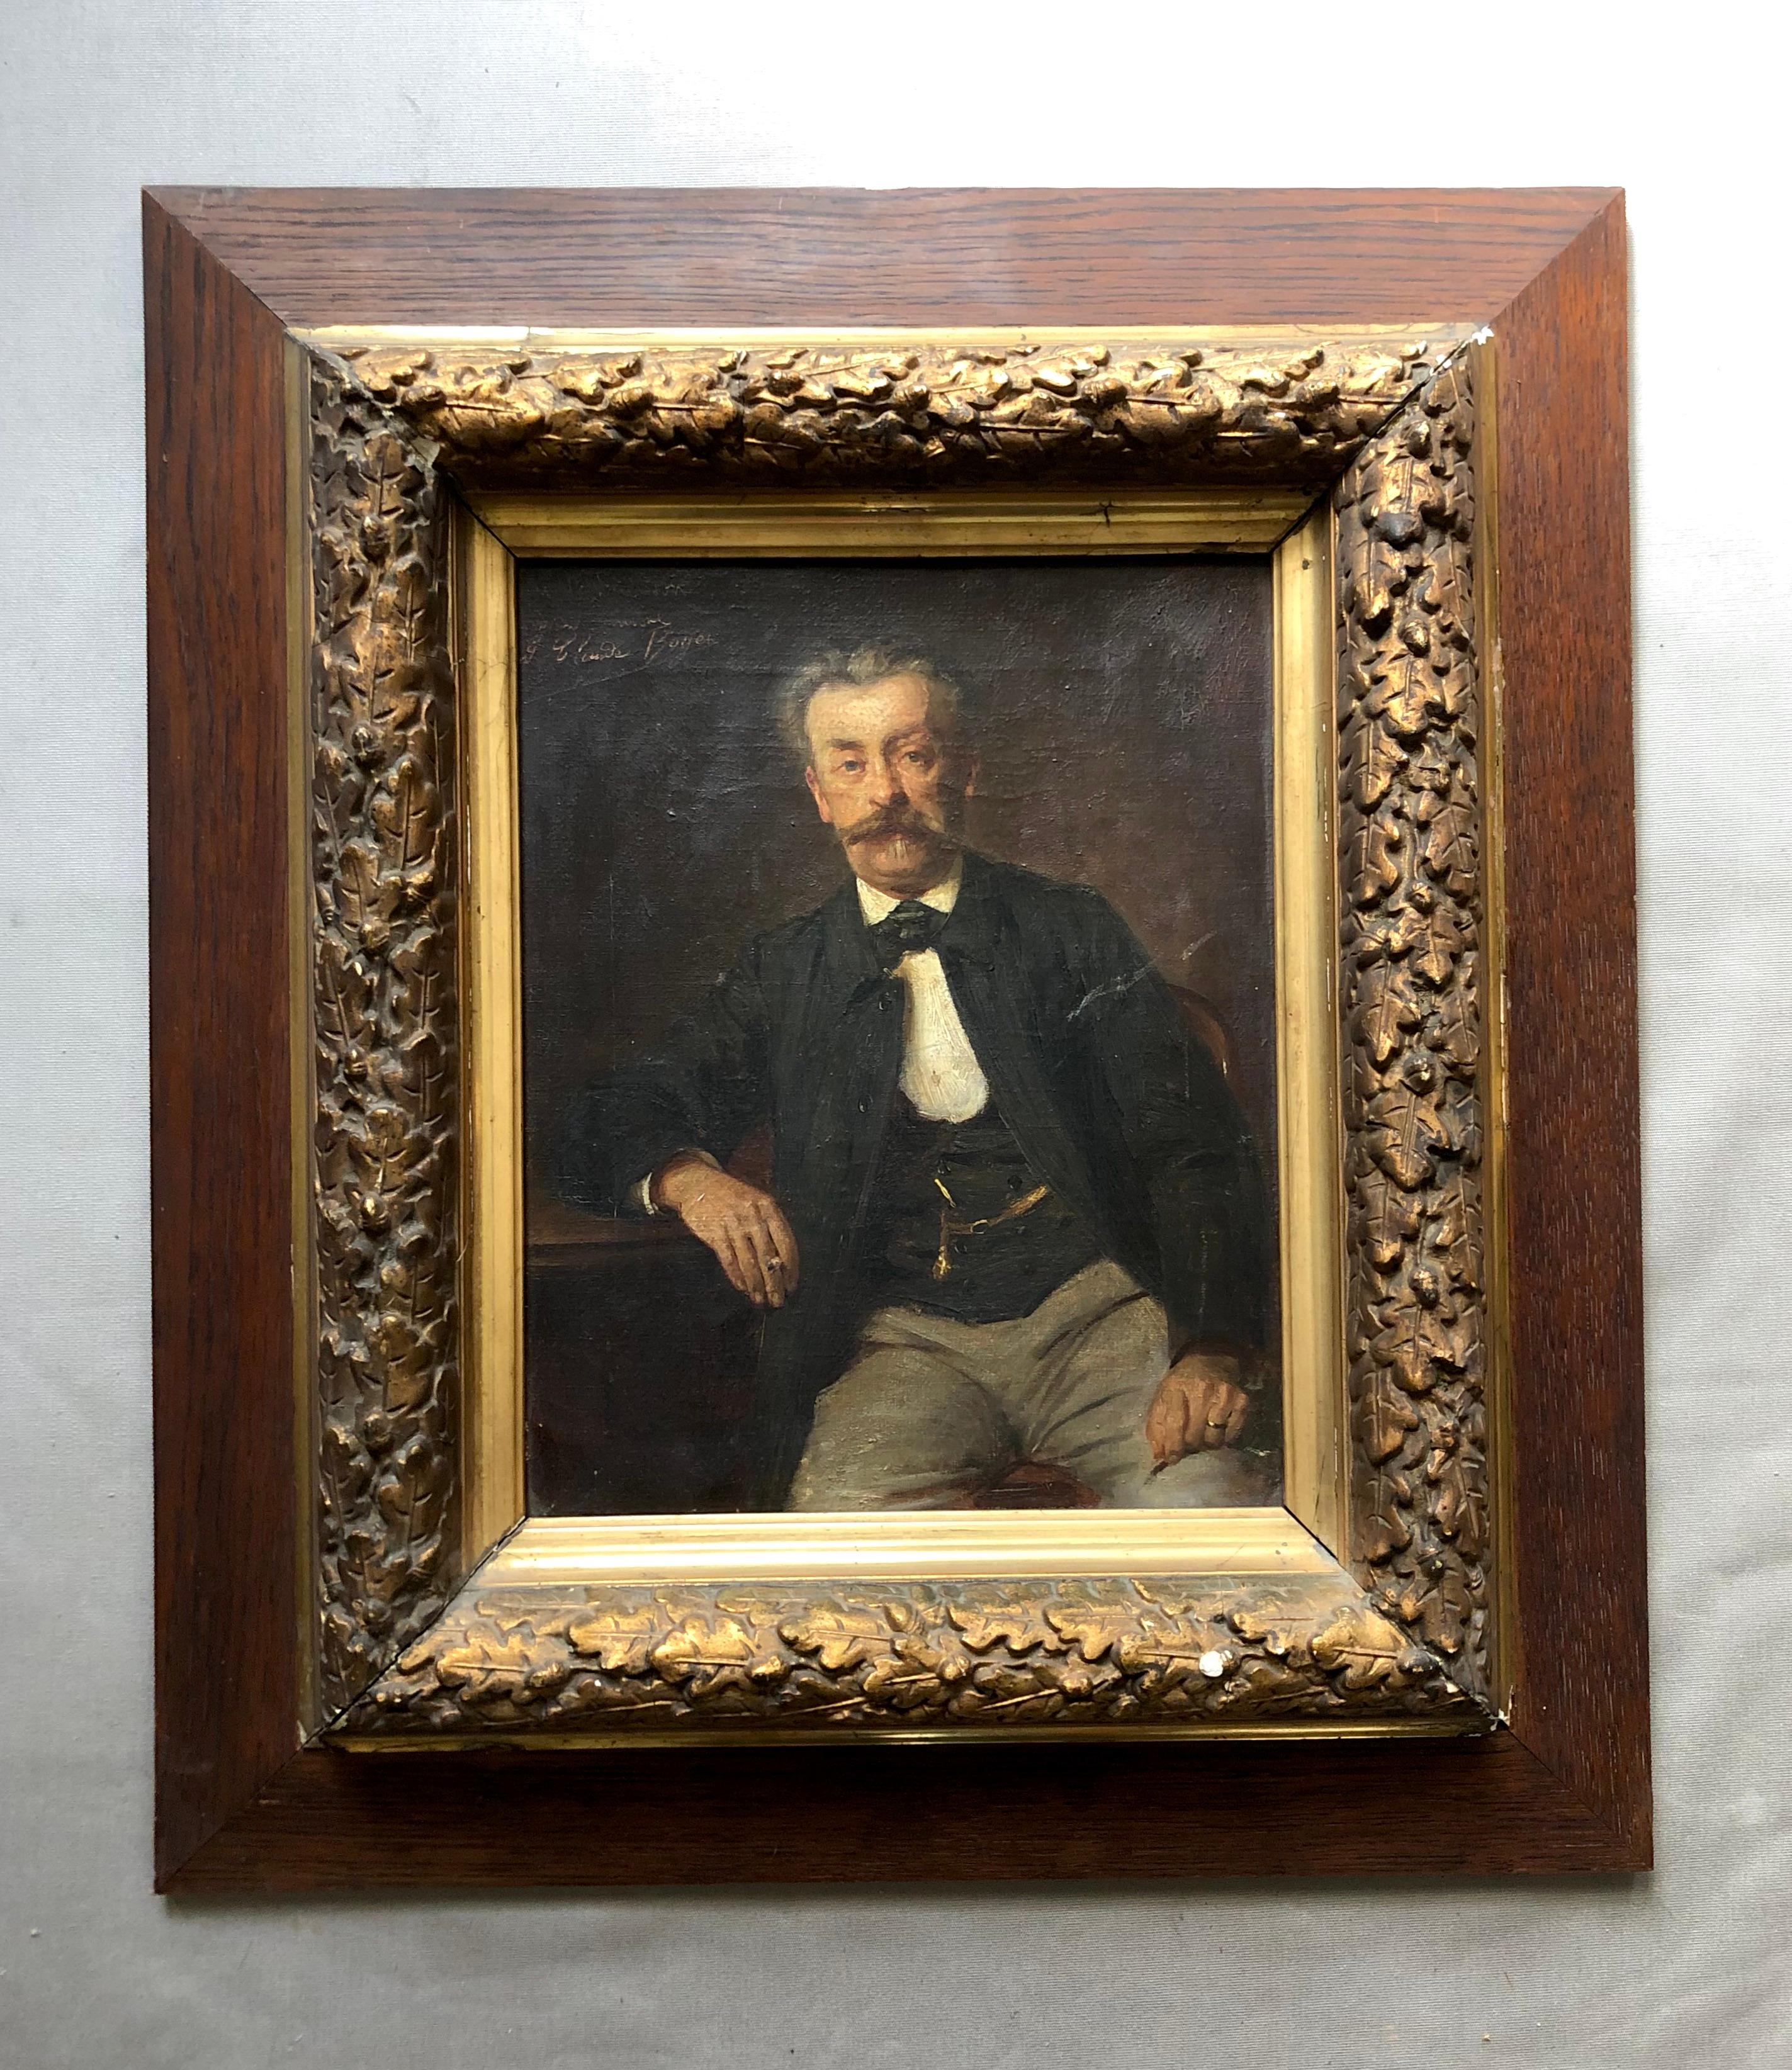 Unknown Portrait Painting - Portrait Of A Man, Oil On Canvas 19th Century, Signature To Identify